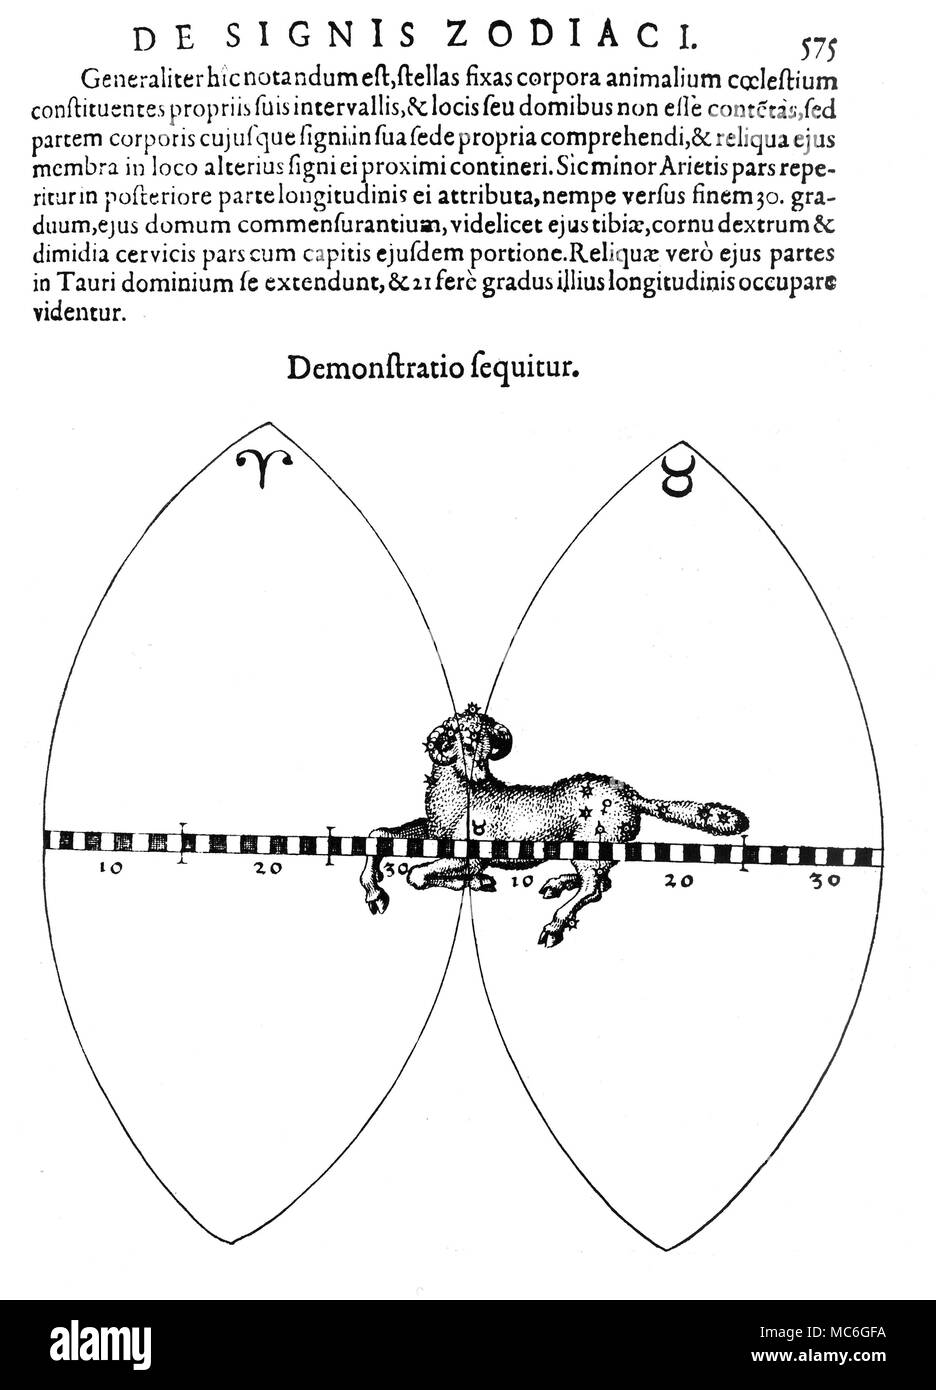 ASTROLOGY - PRECESSION Engraving illustrative of the process of Precession - the slow drift of the stars against the wheel of the zodiac. The gore of Aries and Taurus meet well towards the end of constellational Aries. From Robert Fludd, Technica Macrocosmi Historia, 1617. Stock Photo